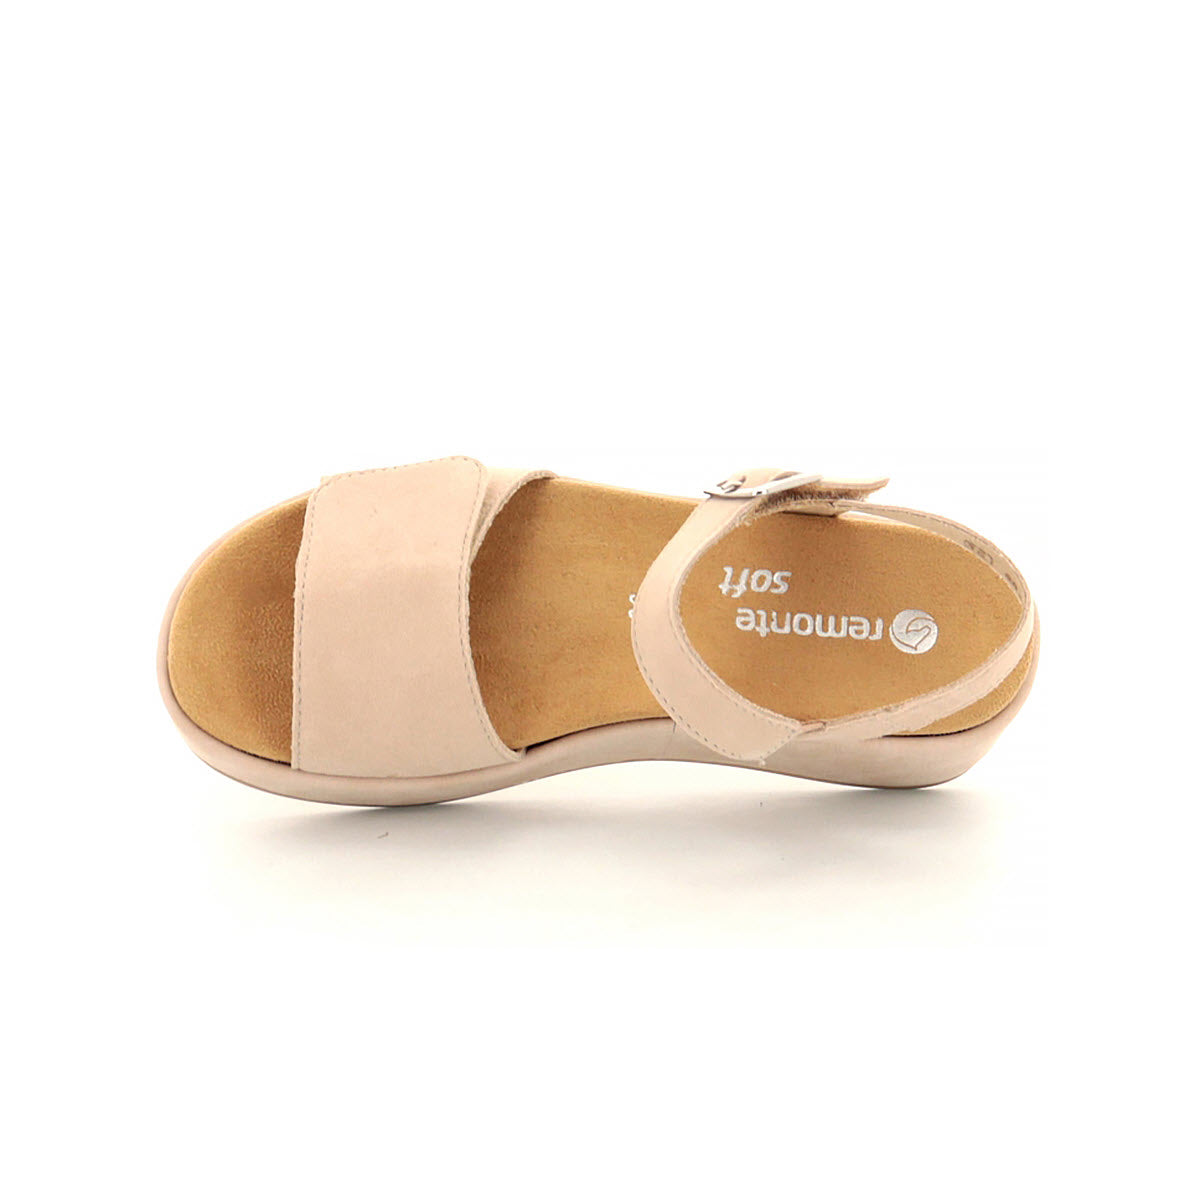 Single blush women&#39;s sandal featuring Remonte&#39;s new style, with a closed toe and open back, viewed from the side, on a white background.